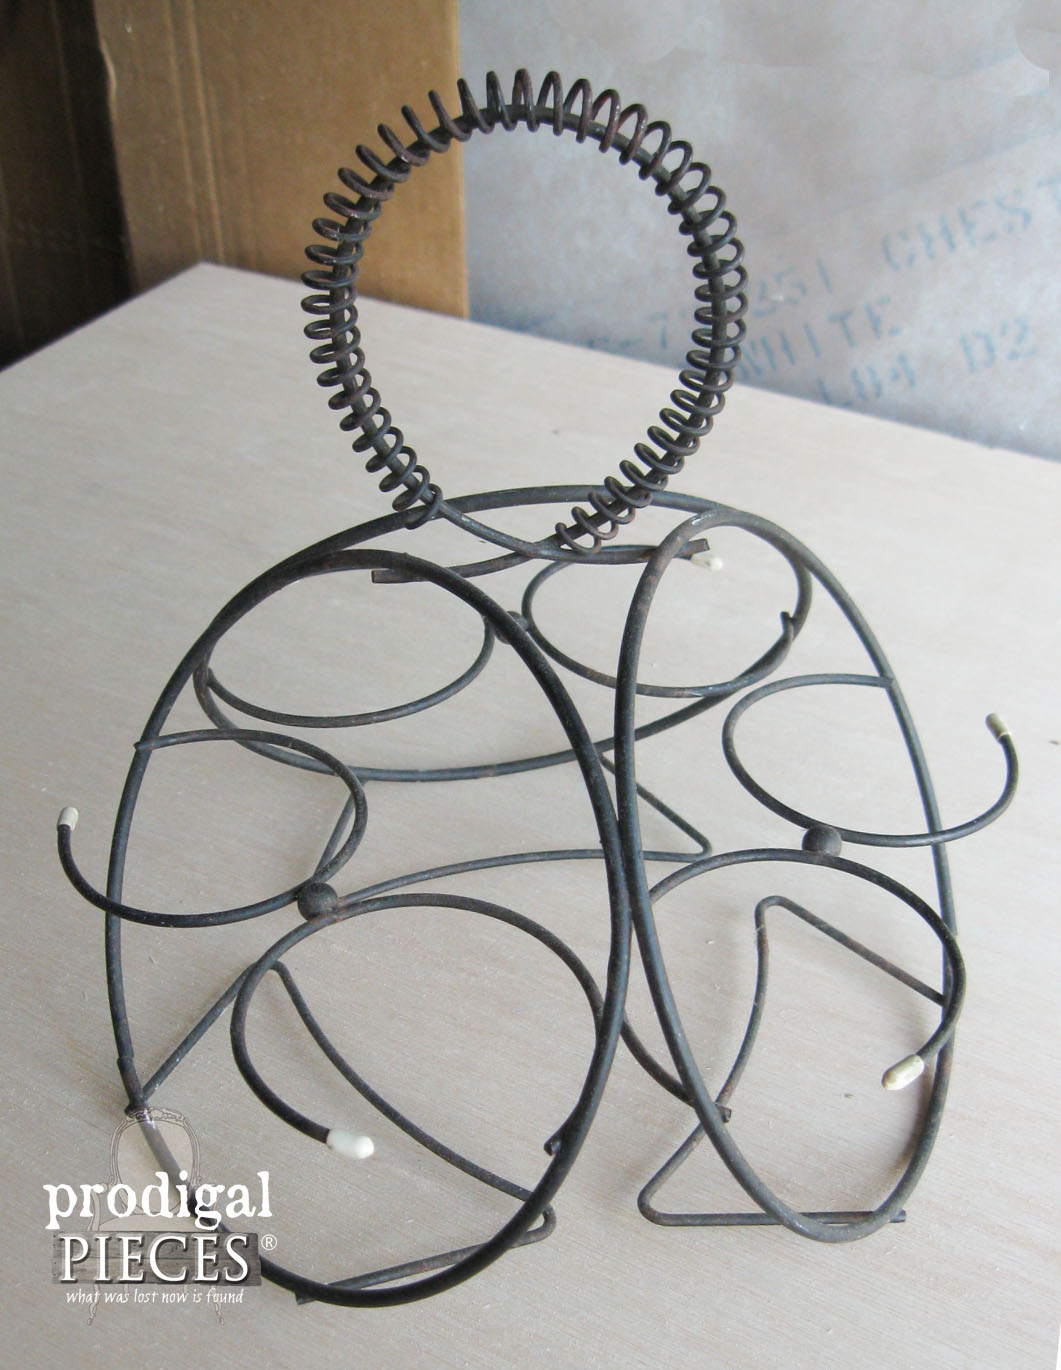 Wire Holder Finds New Purpose with the Help of Prodigal Pieces | www.prodigalpieces.com